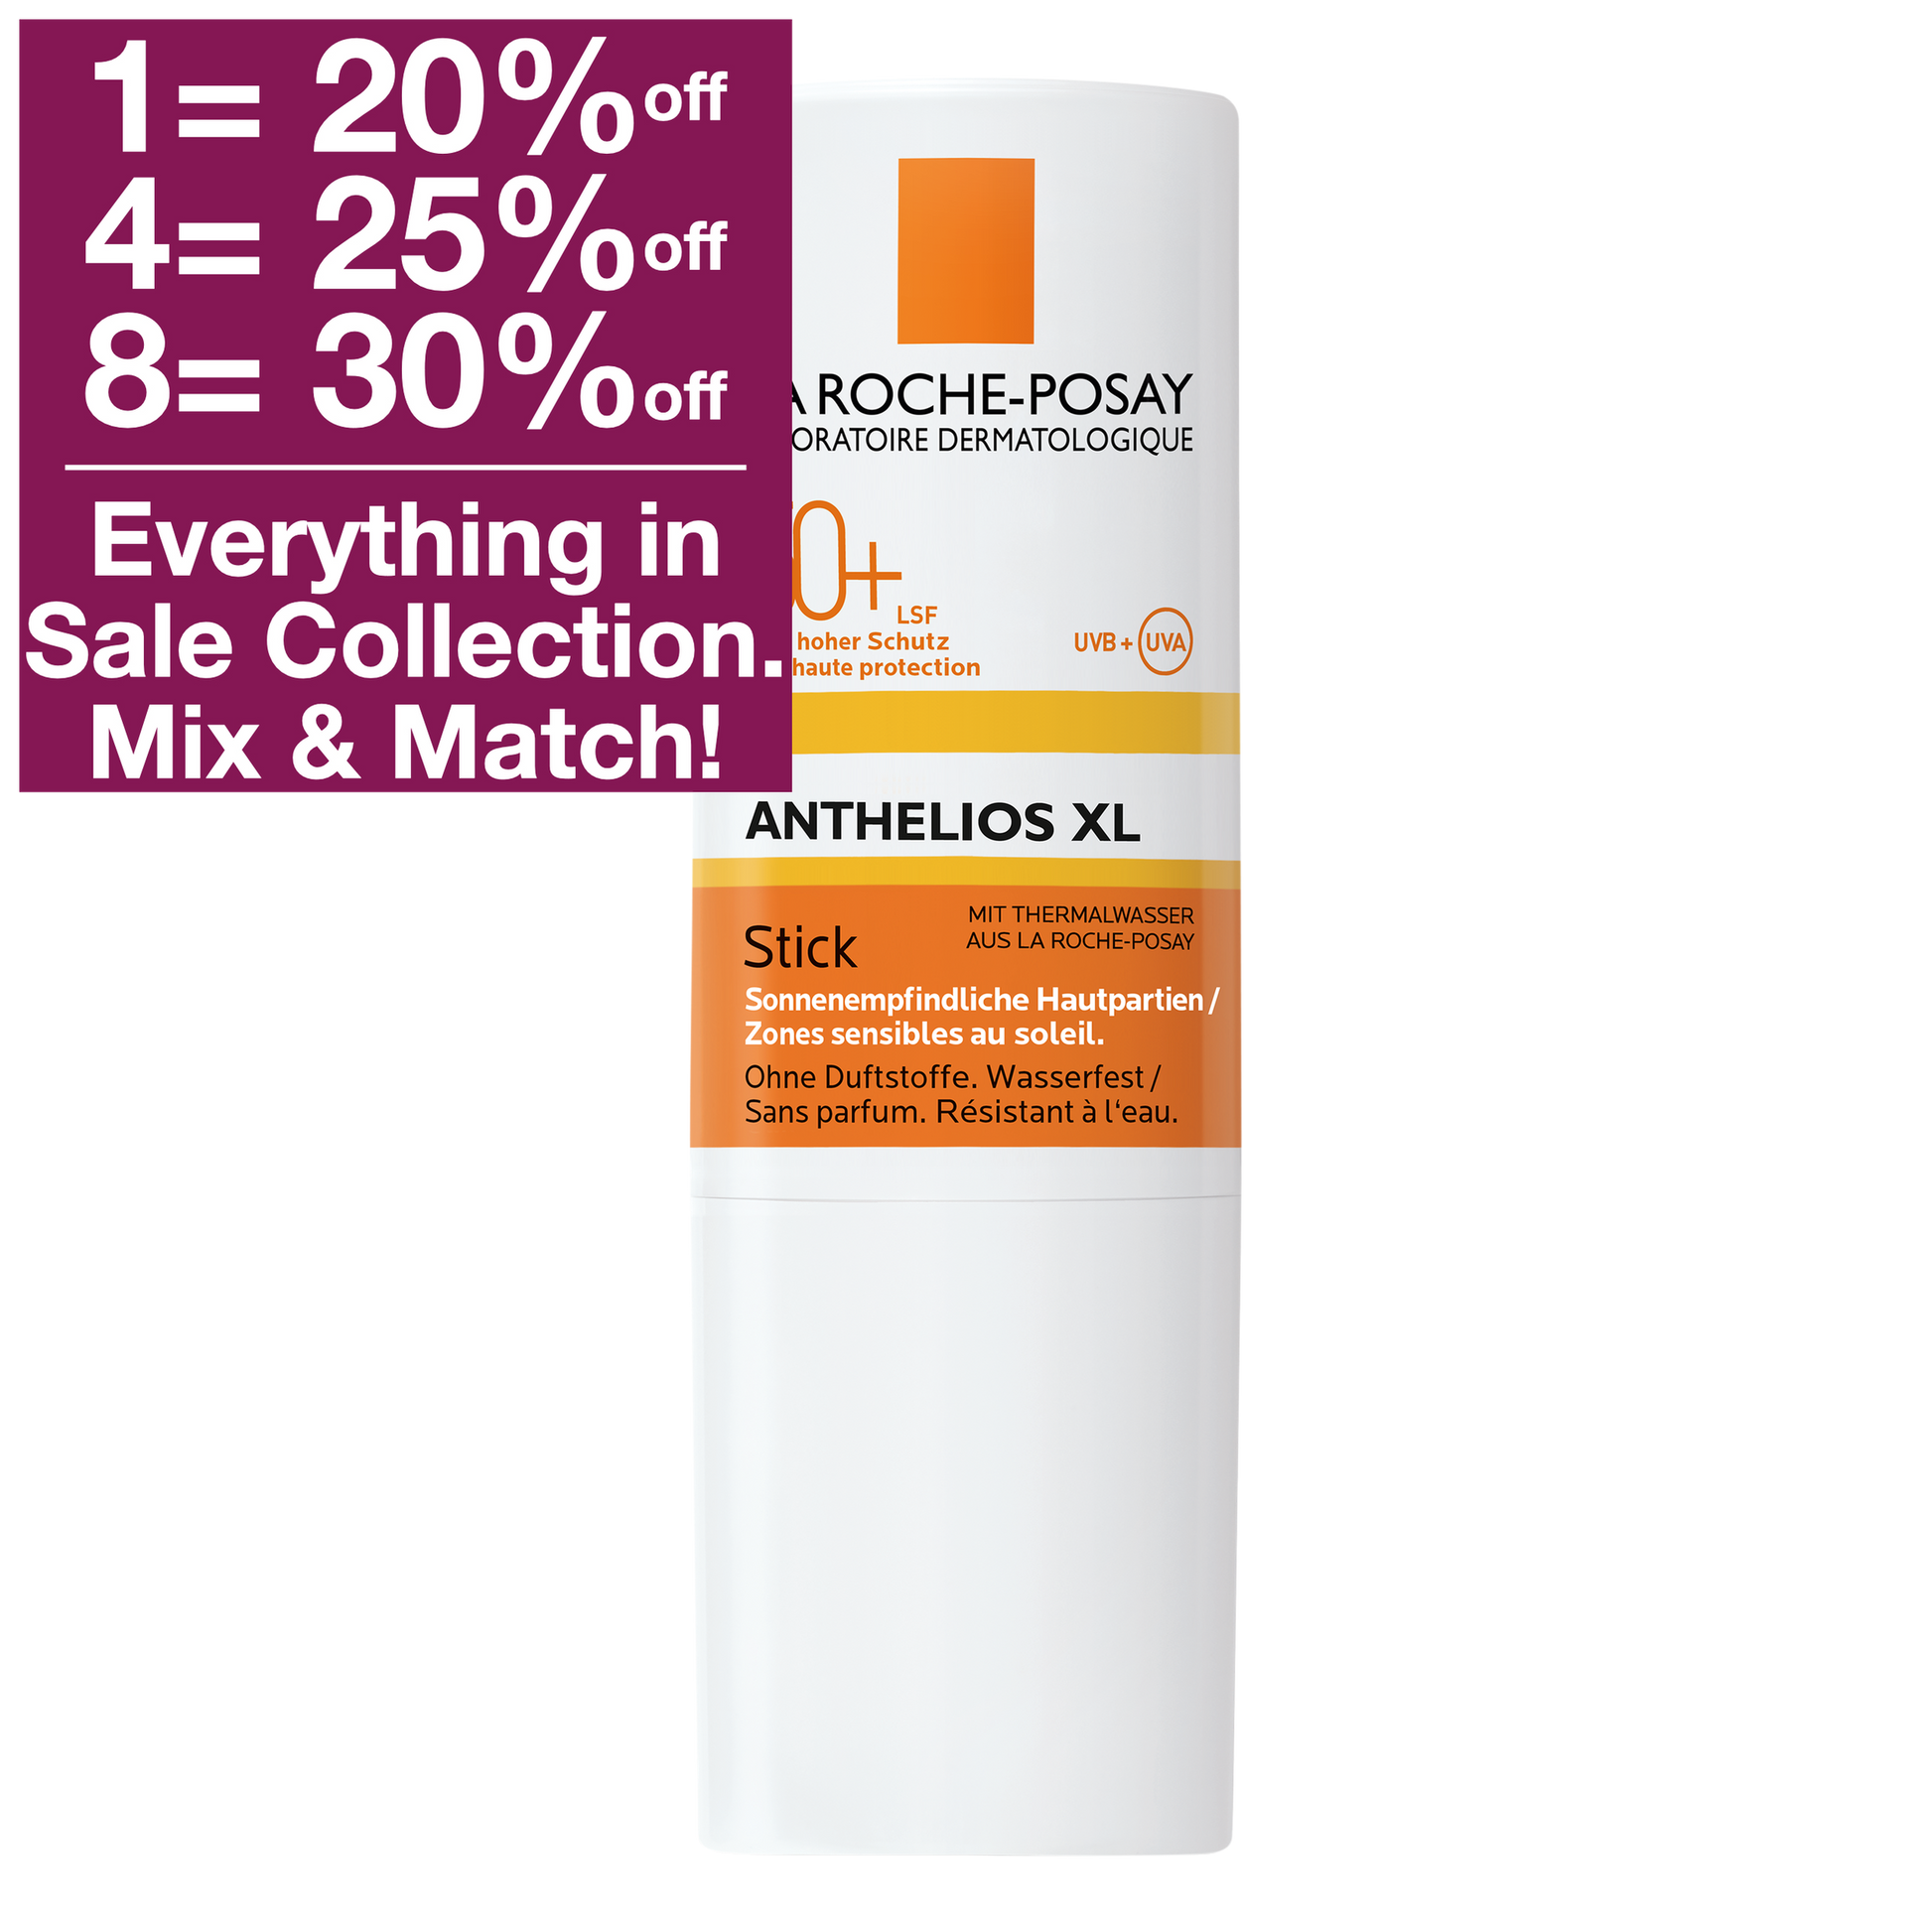 La Roche-Posay ANTHELIOS XL offers very high protection for areas that are sun-sensitive and/or over-exposure to the sun, especially convenient to protect the skin from areas that are over-exposed : eye area, nose, ears, scars, moles.